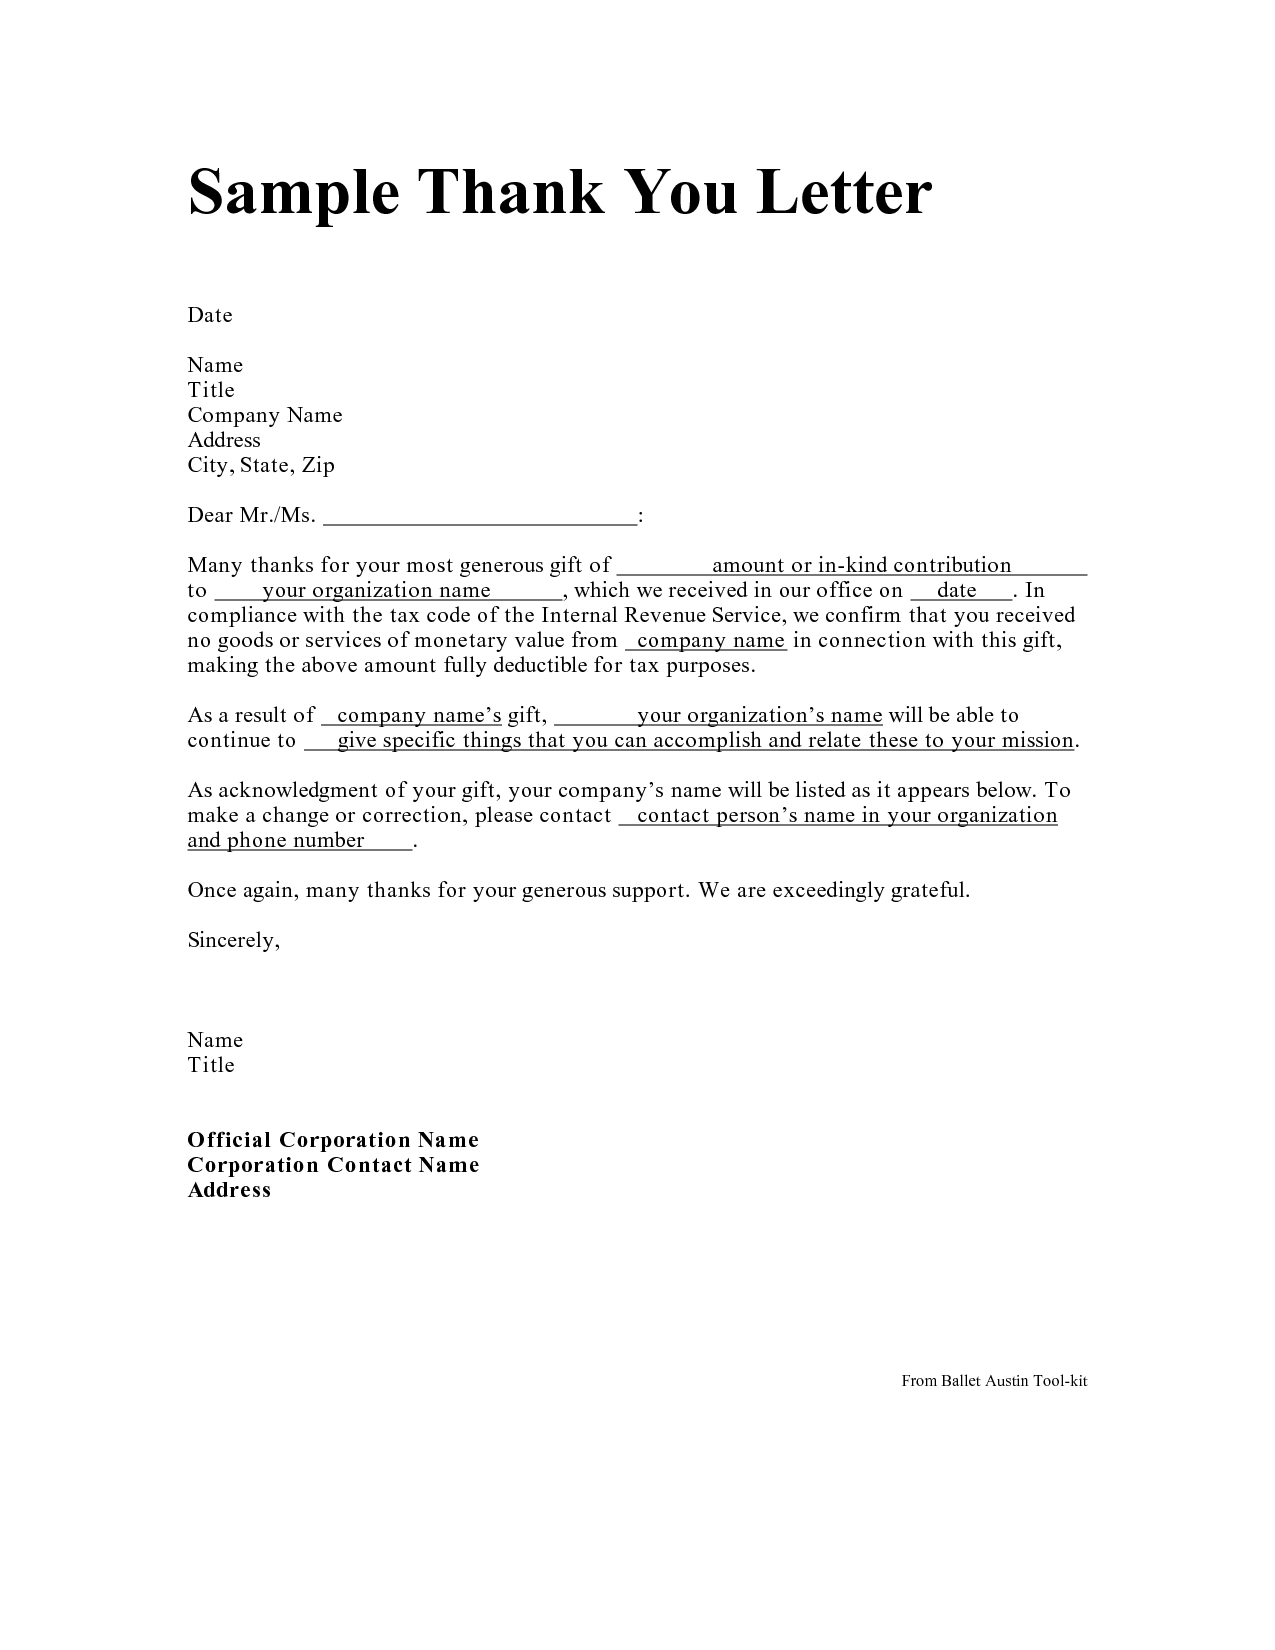 Complaint Letter Template - Personal Thank You Letter Personal Thank You Letter Samples